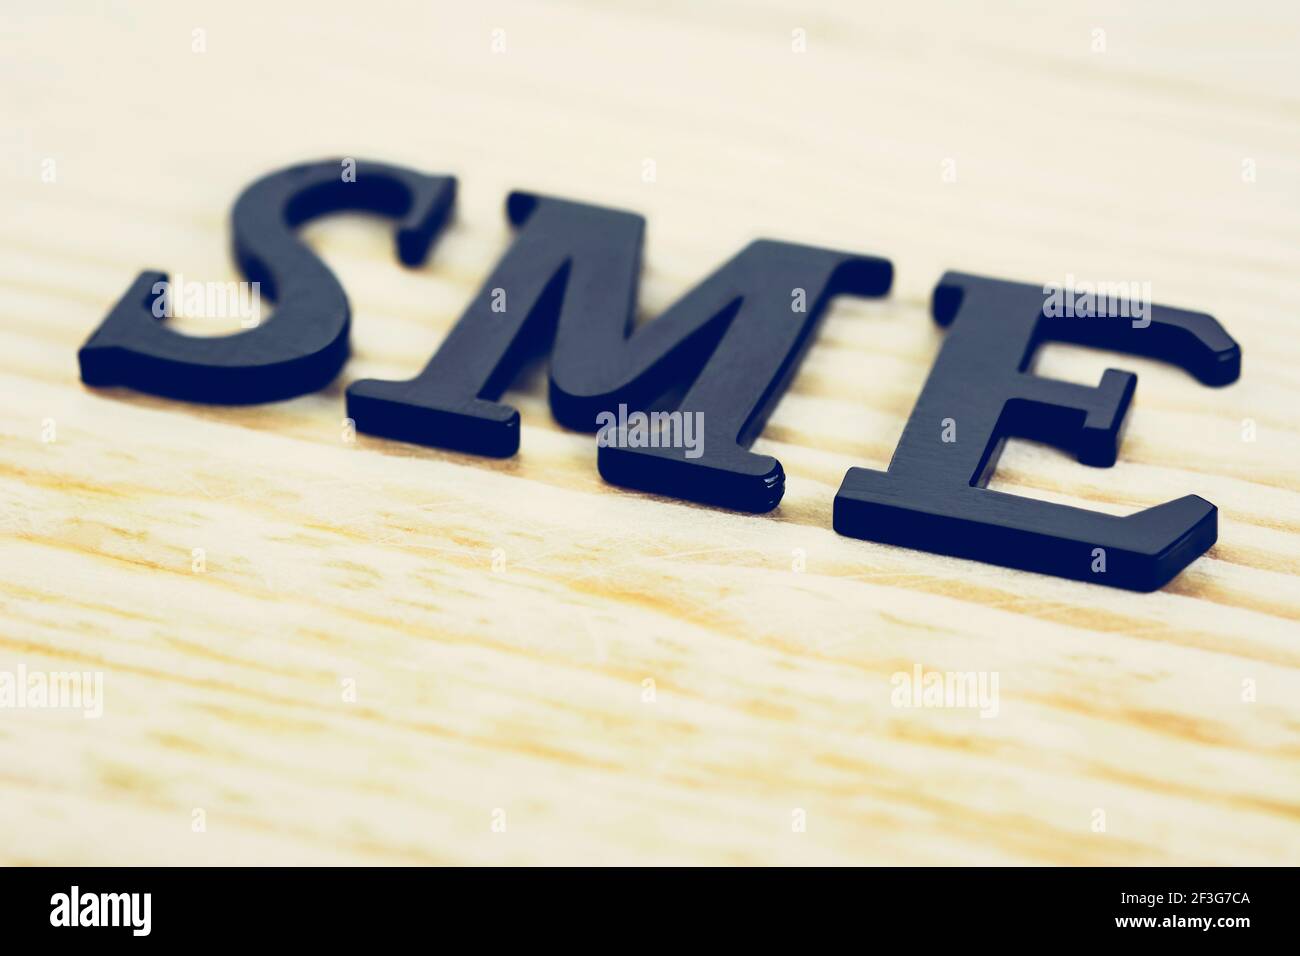 SME (or Small and Medium Enterprises) sign on wood background Stock Photo